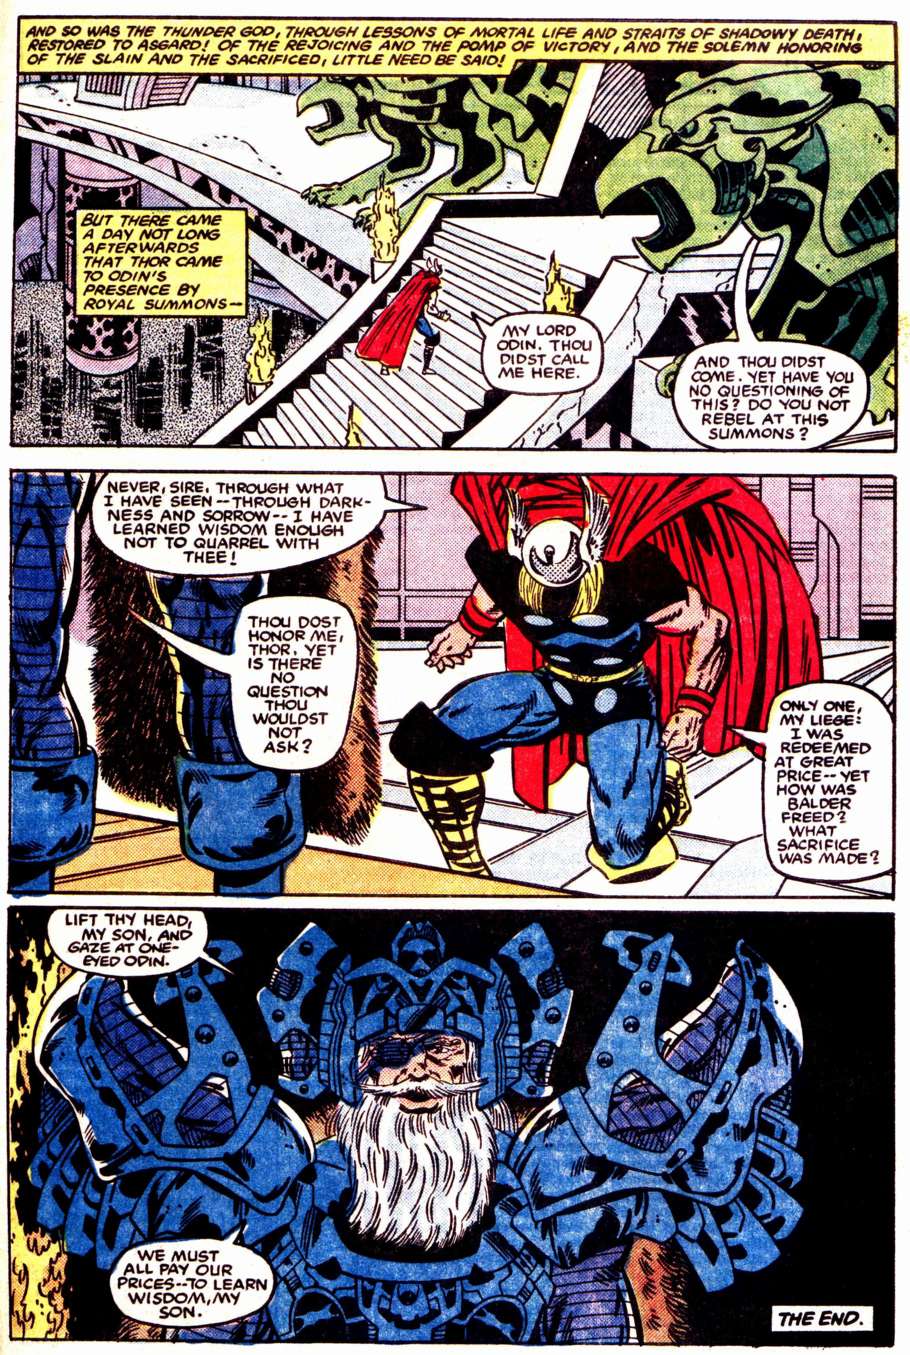 What If? (1977) issue 47 - Loki had found The hammer of Thor - Page 41